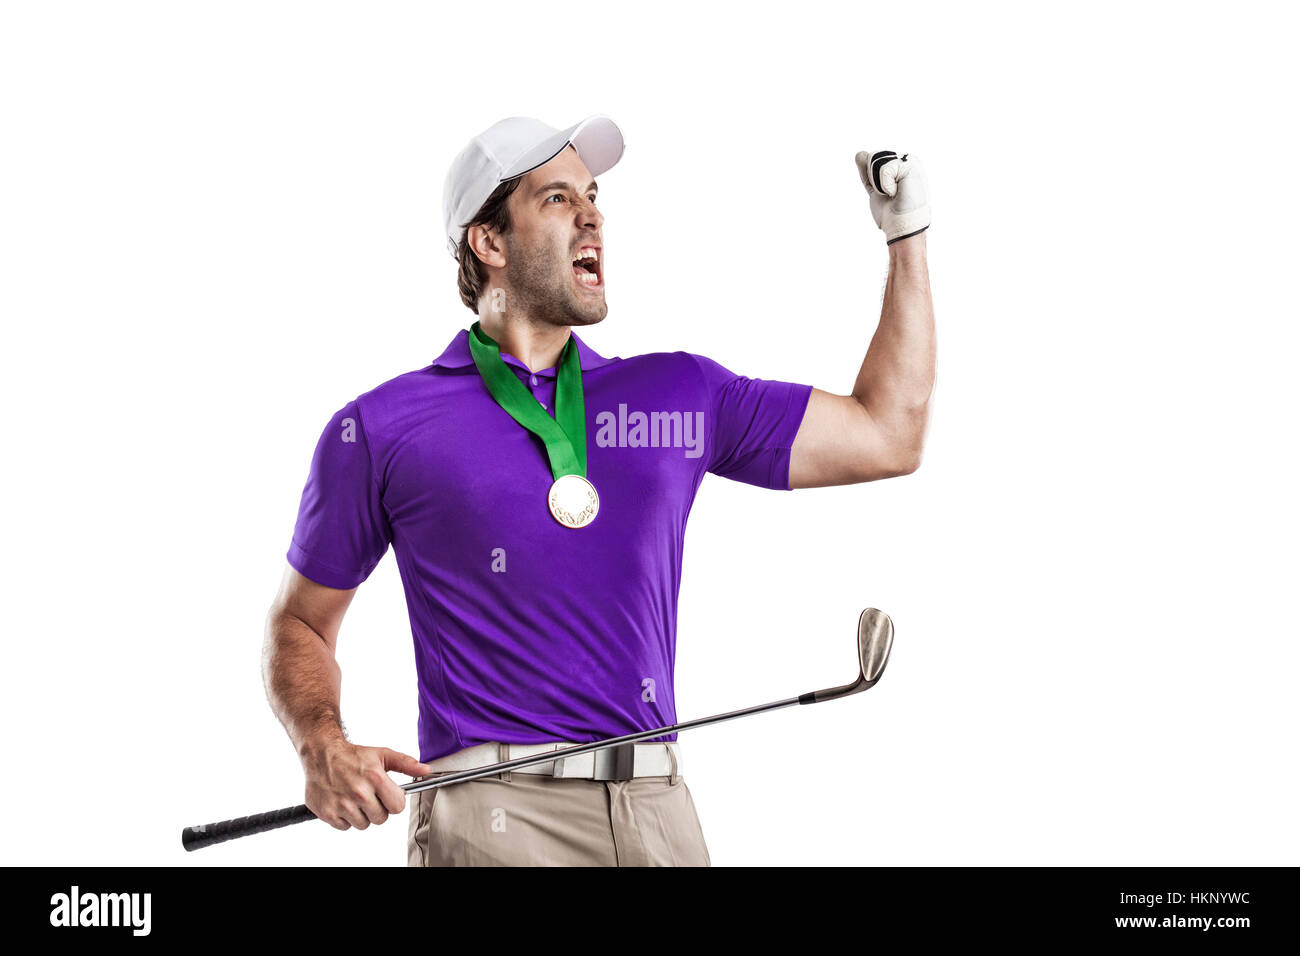 Golf Player in a purple shirt celebrating with a golden medal, on a ...